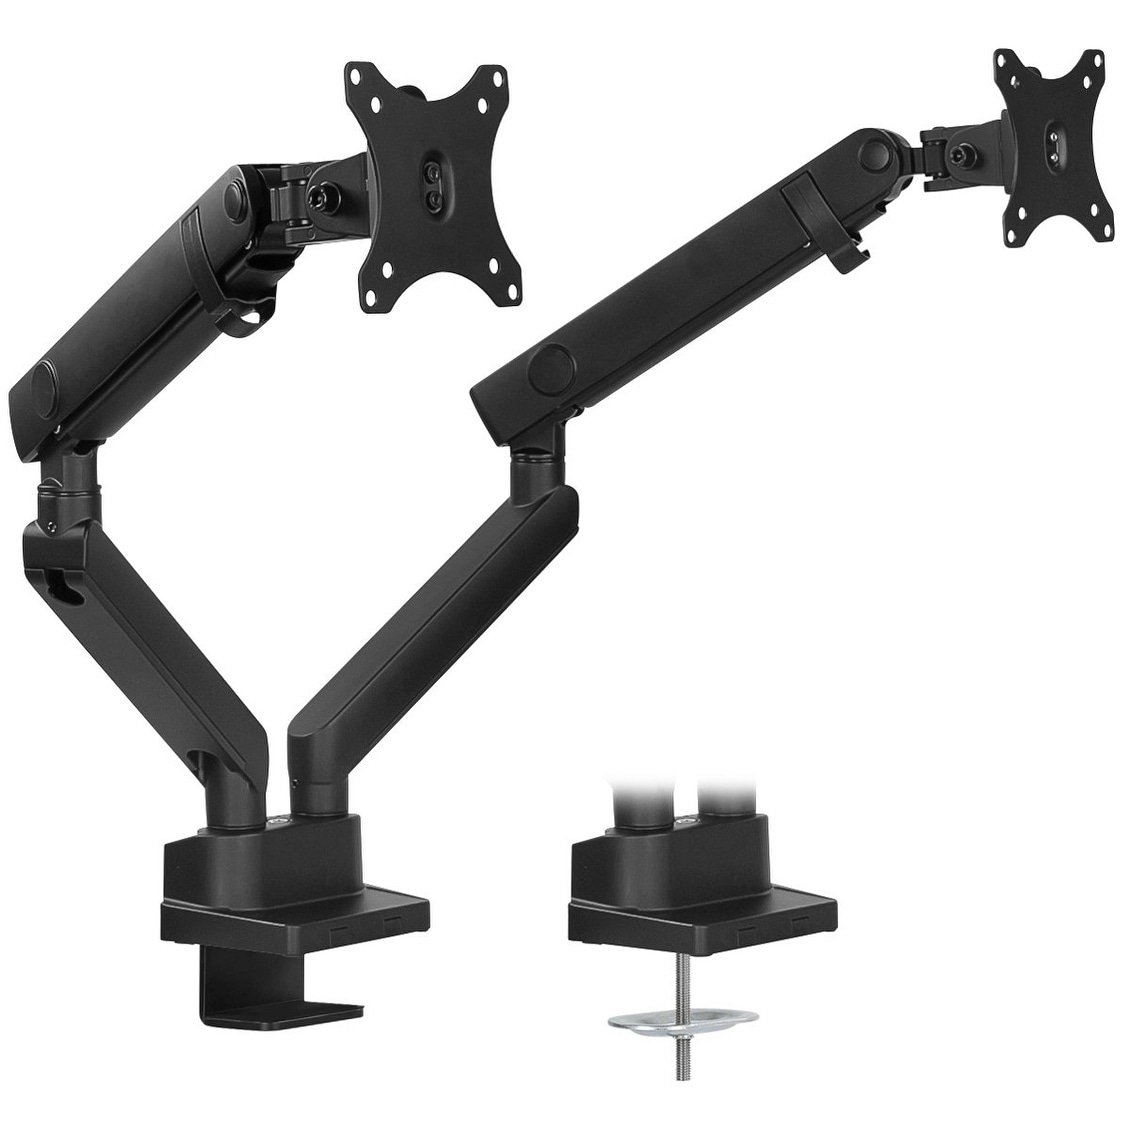 Shop Mount It Dual Monitor Arm Desk Mount For Two Computer